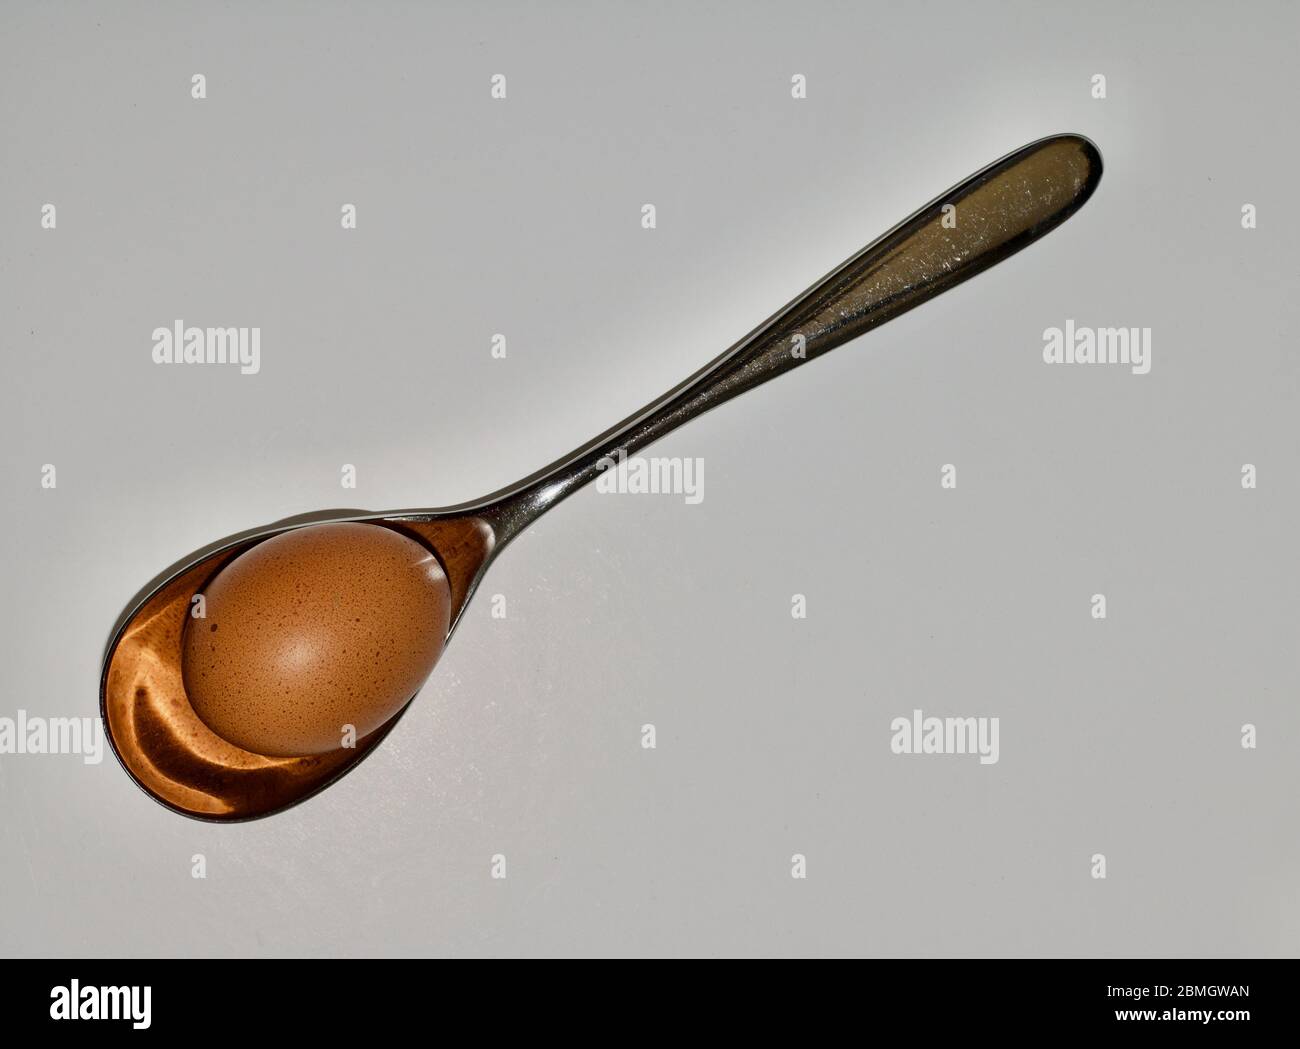 Large silver tablespoon holding a brown egg on white background Stock Photo